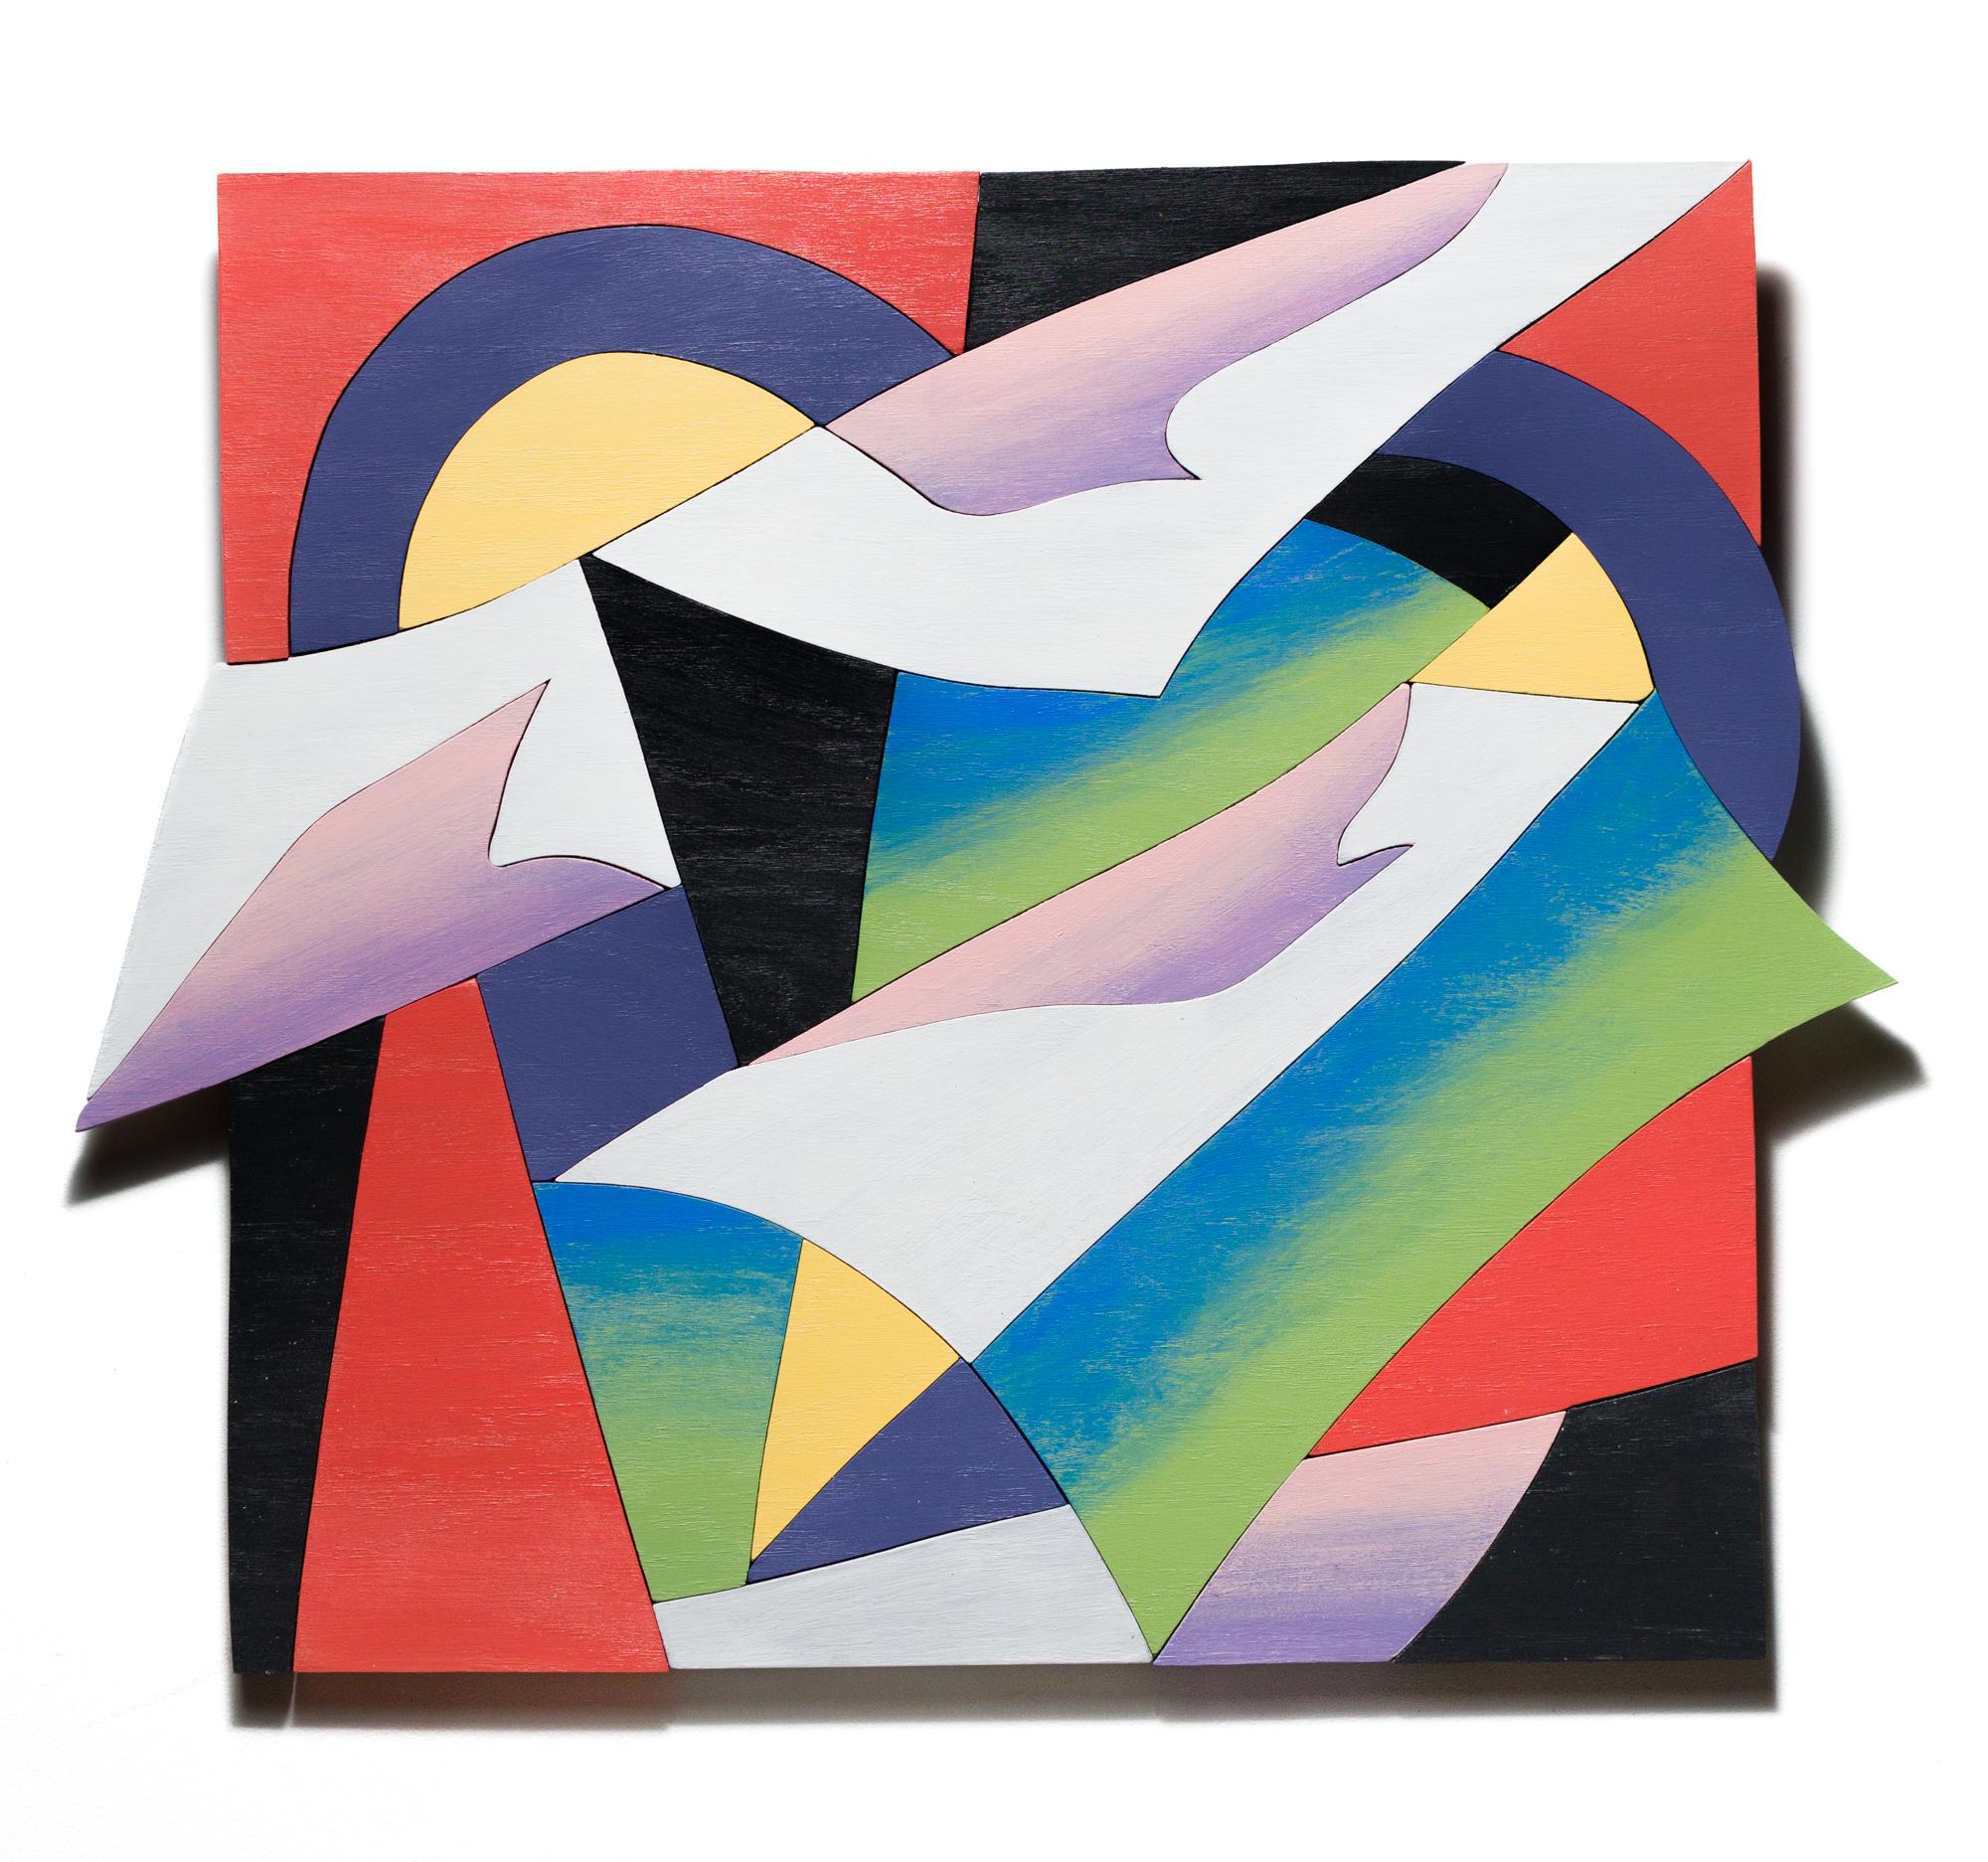 "Fragments 3", Abstract, Assembled Hand-Cut Oak, Bright colors, Wood collage